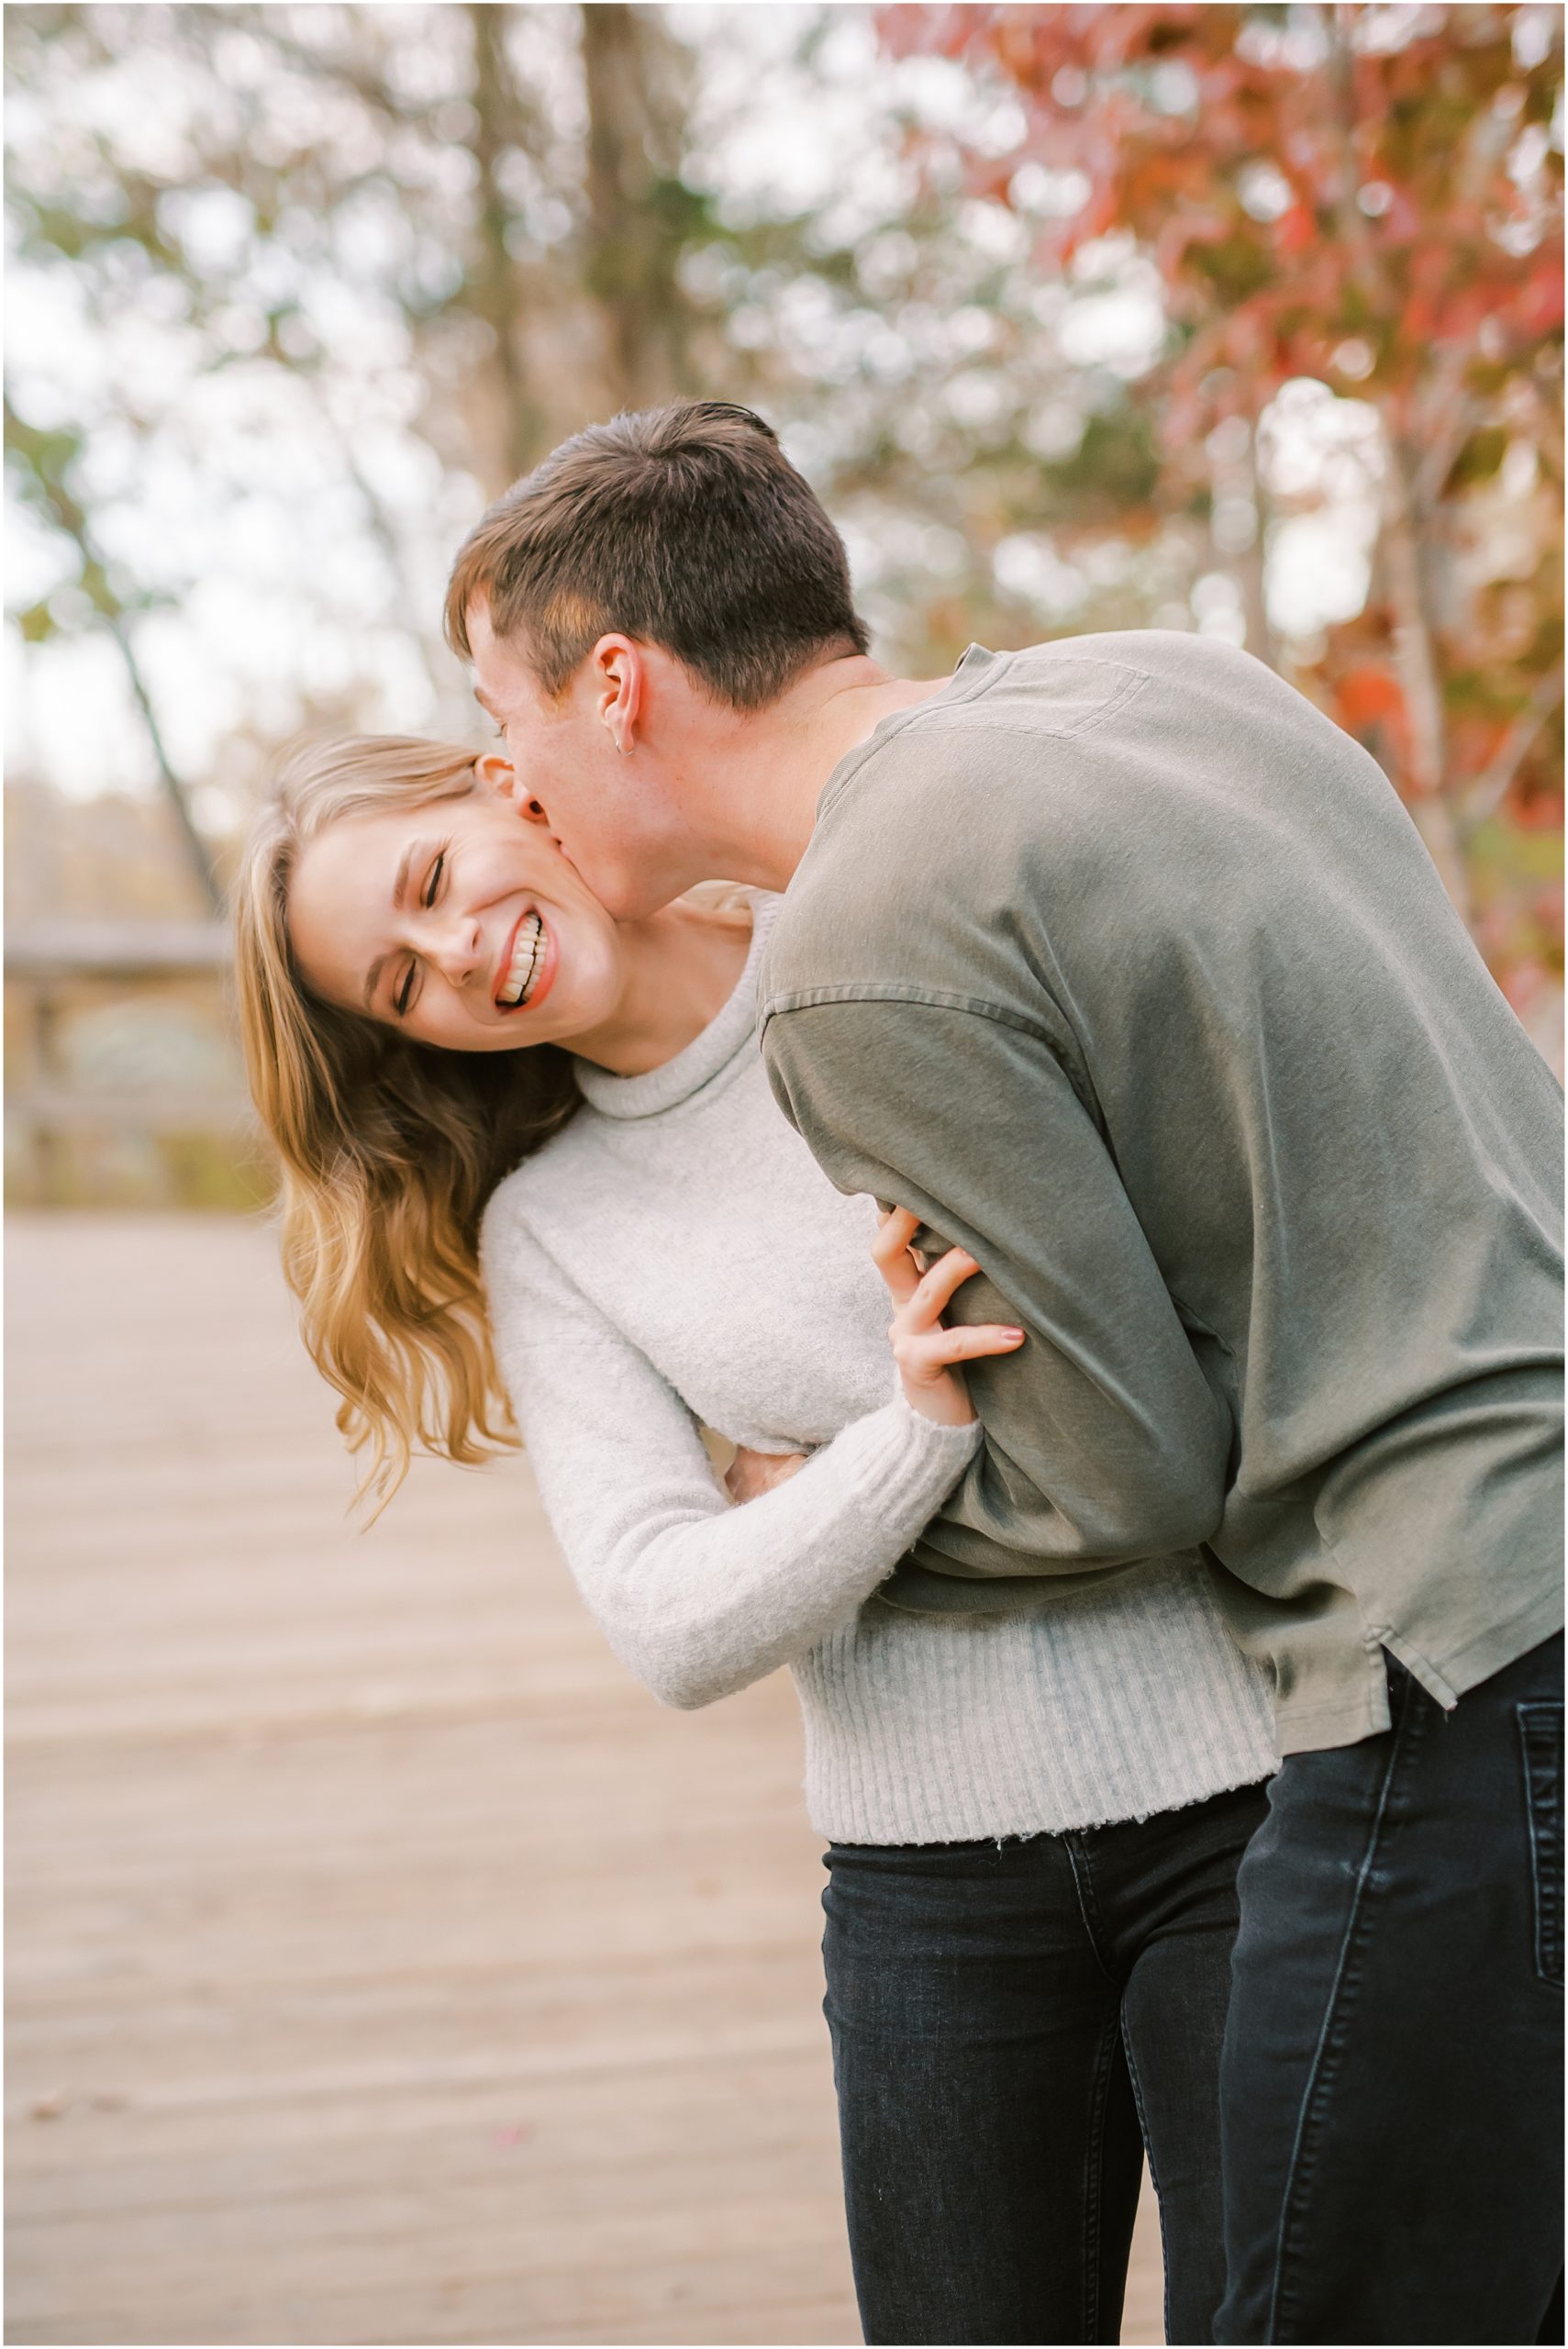 Couple kissing on cheek during autumn engagement session